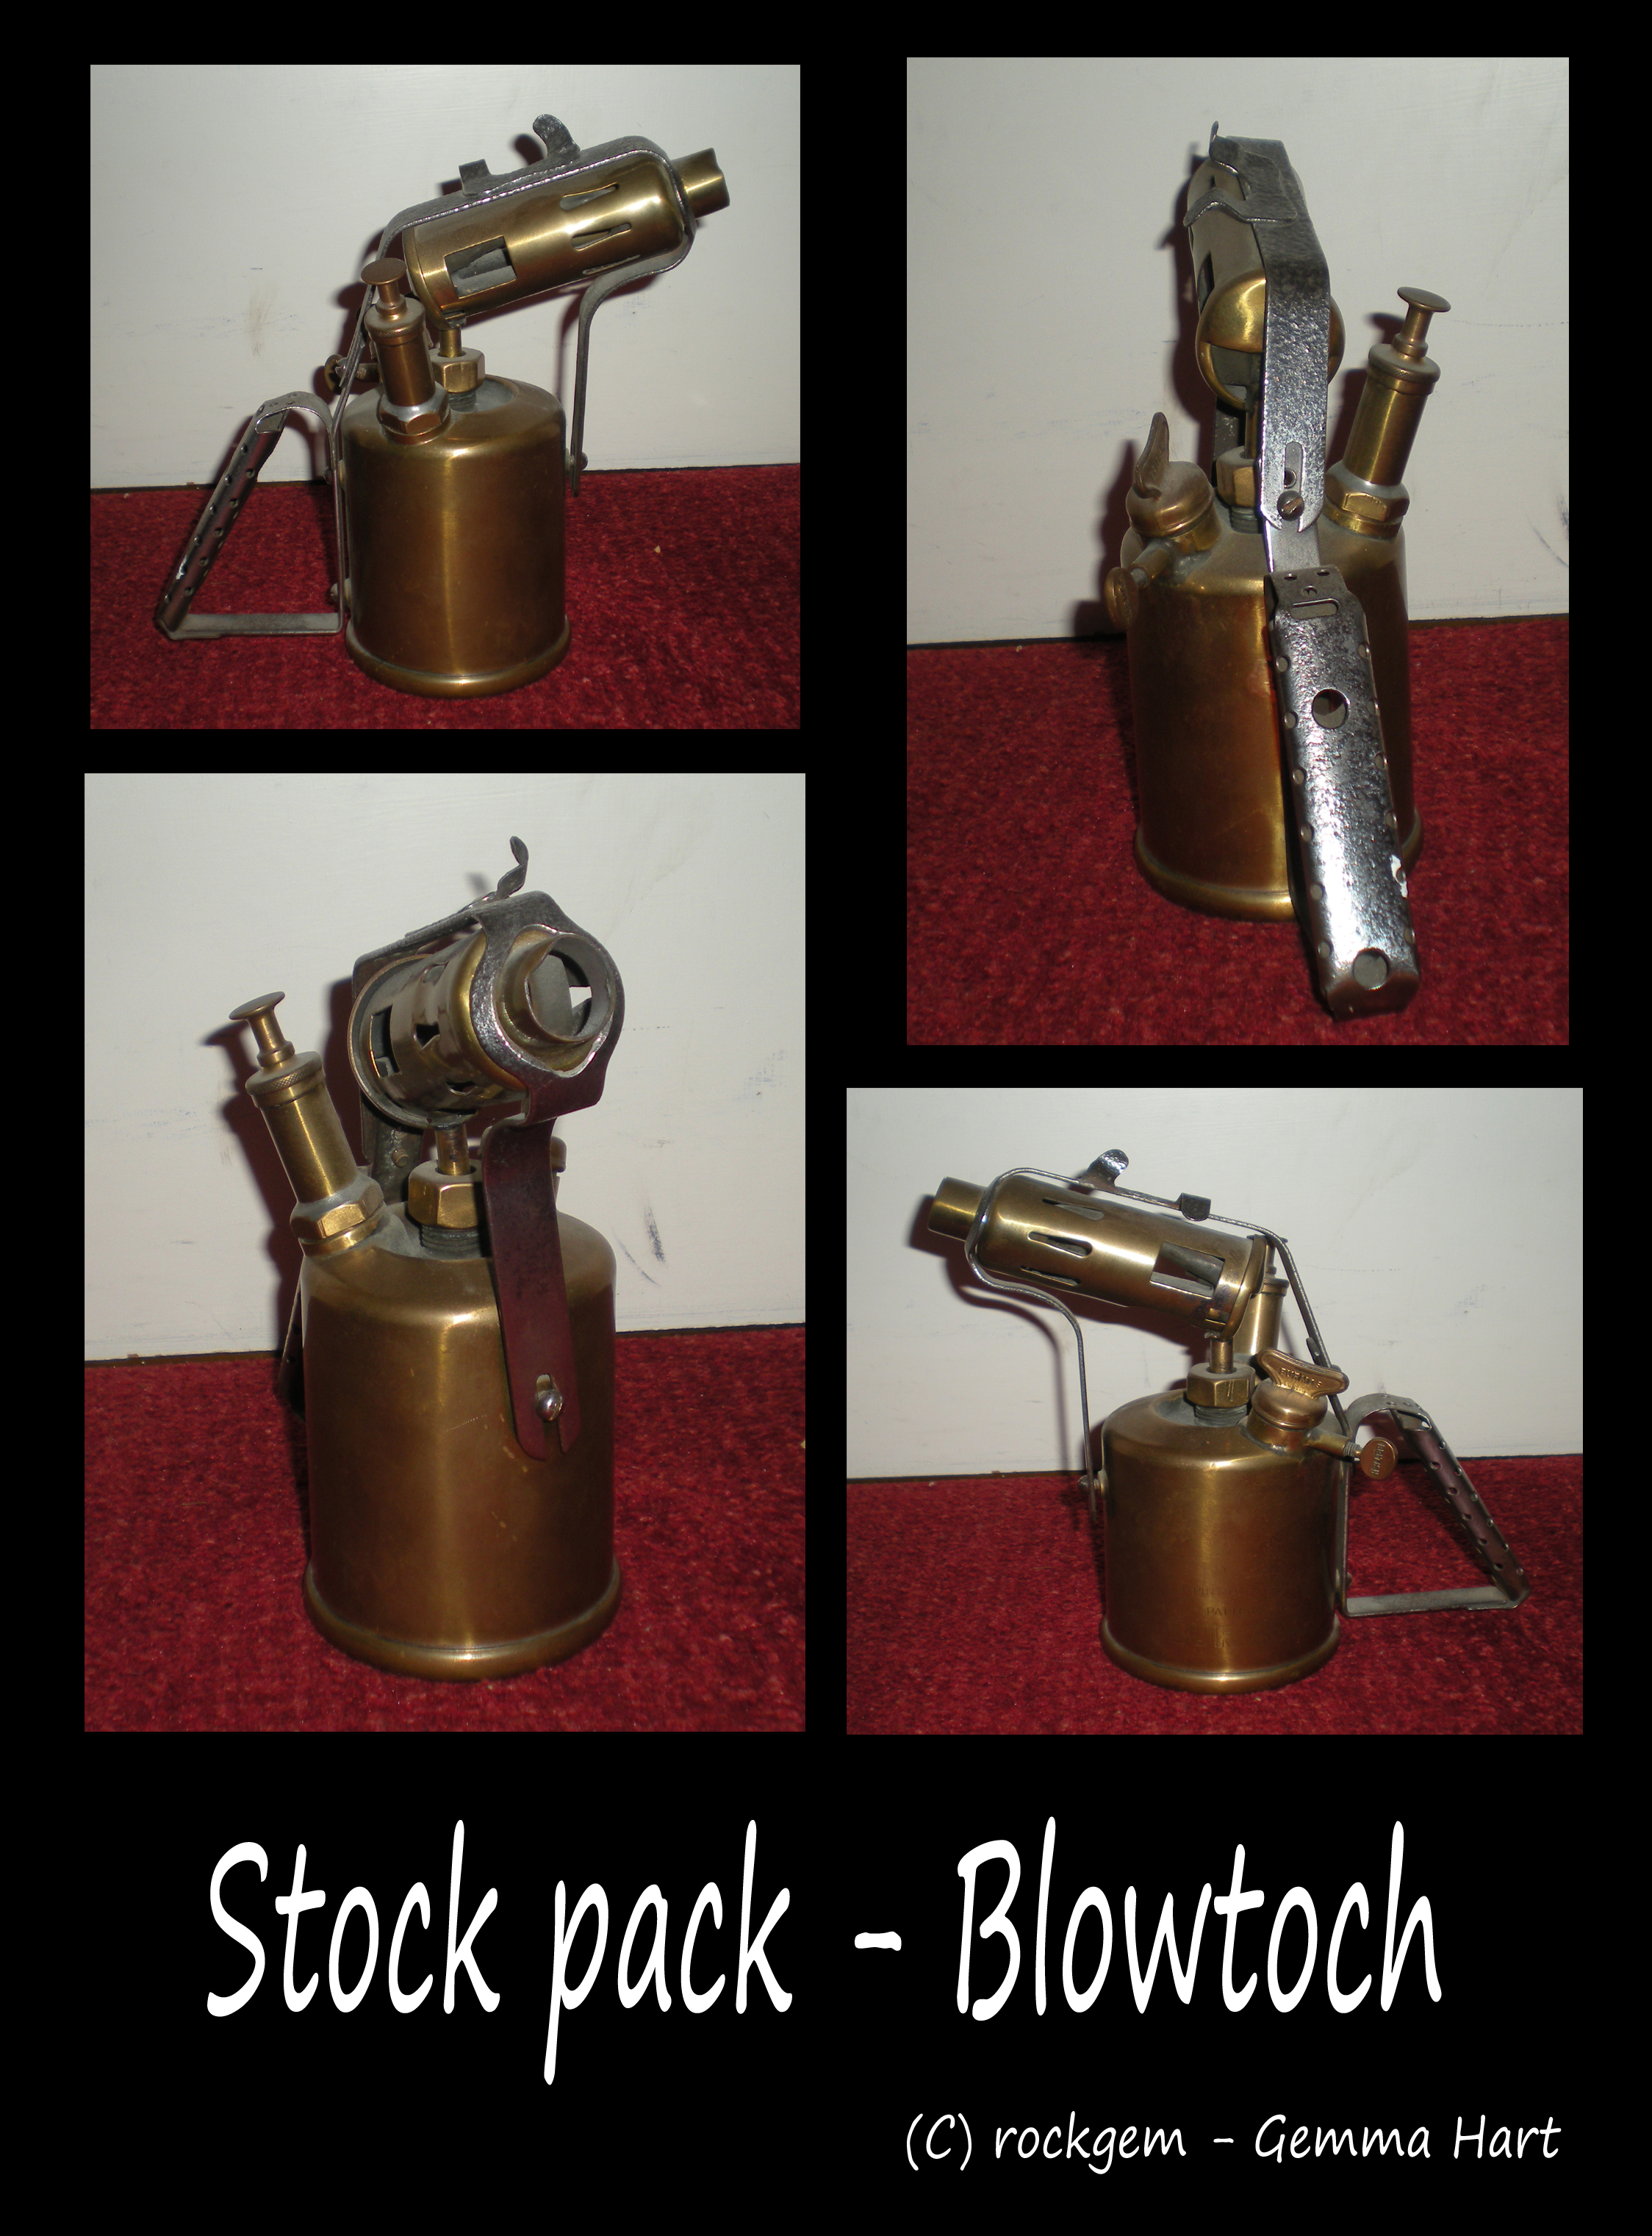 Stock pack - Blowtorch